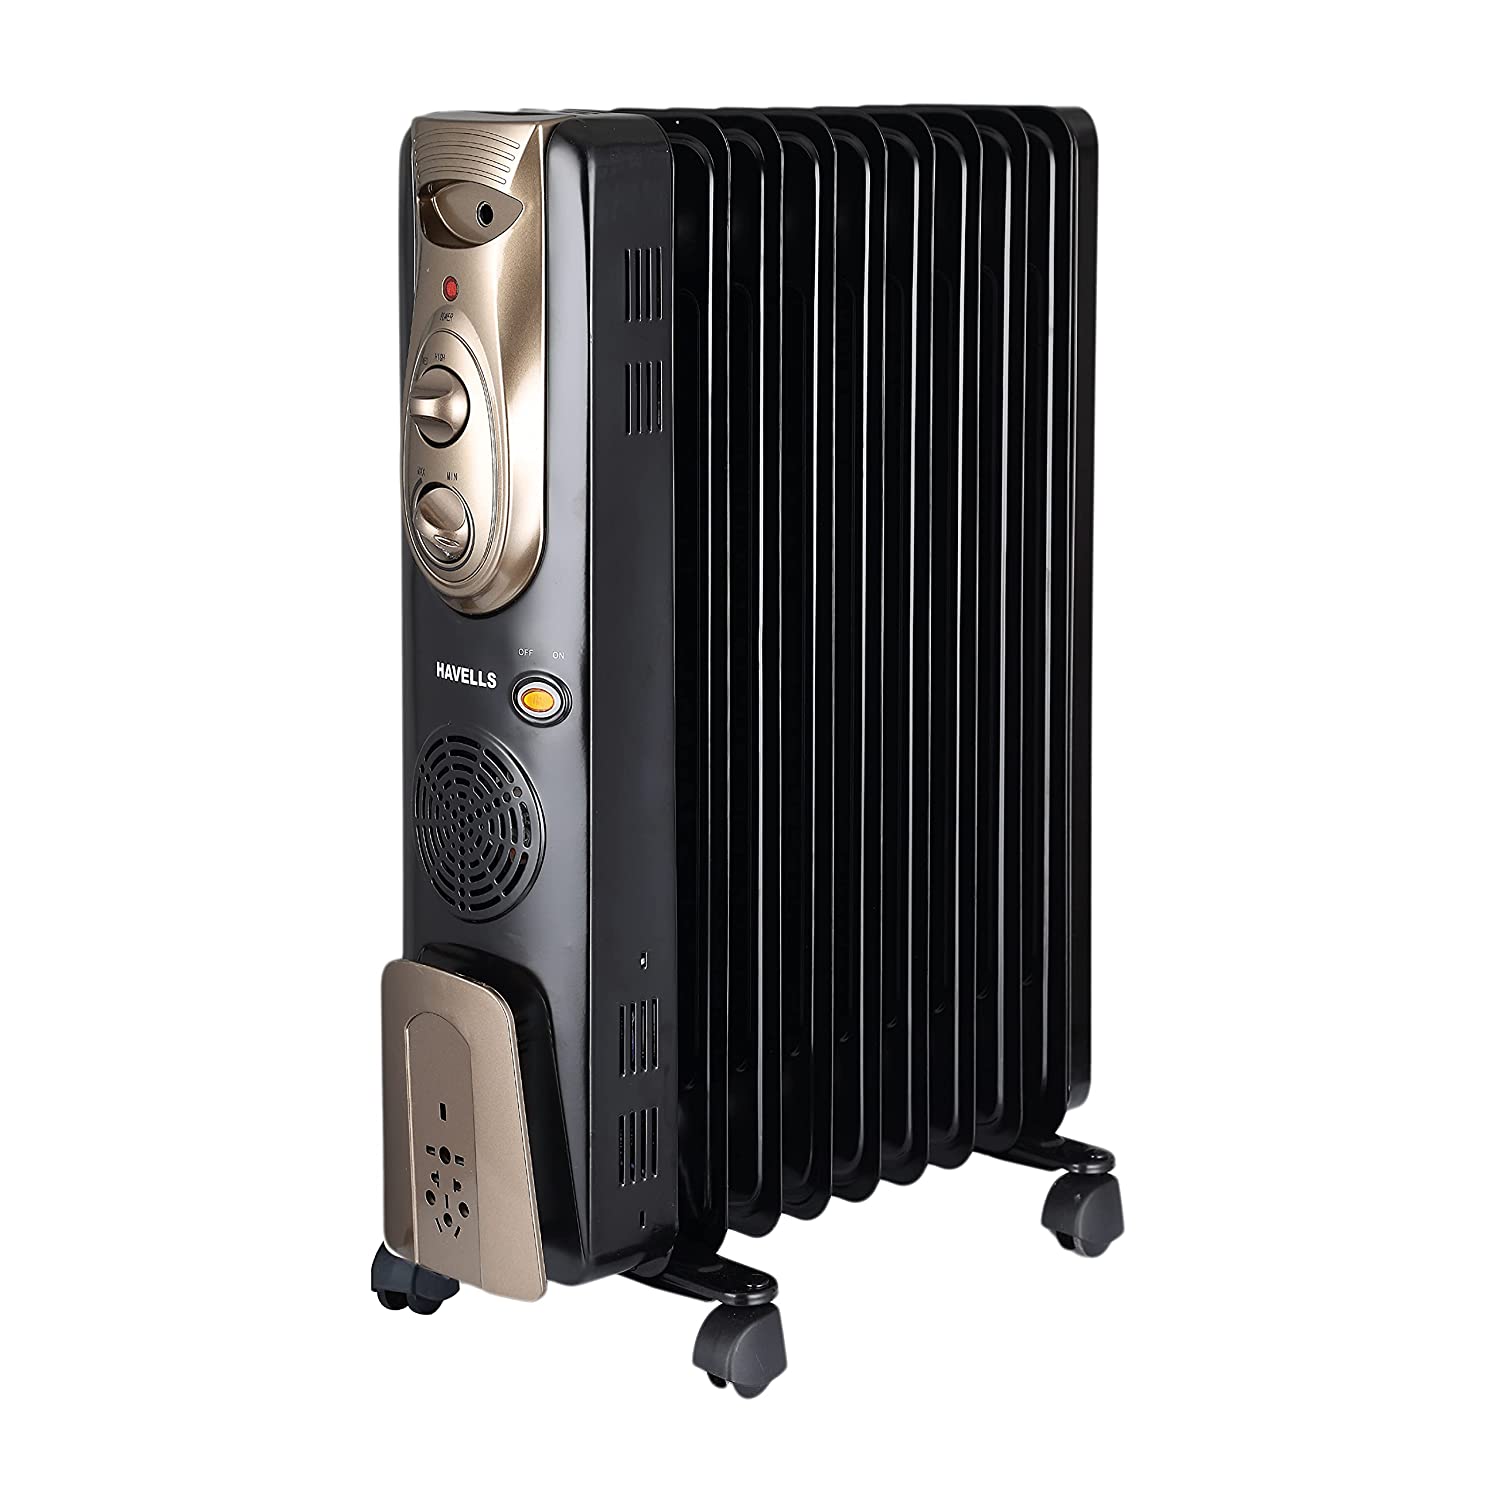 Amazon Deal: Best deals on room heaters for winter, best brands of room heaters available on Amazon for Rs.600